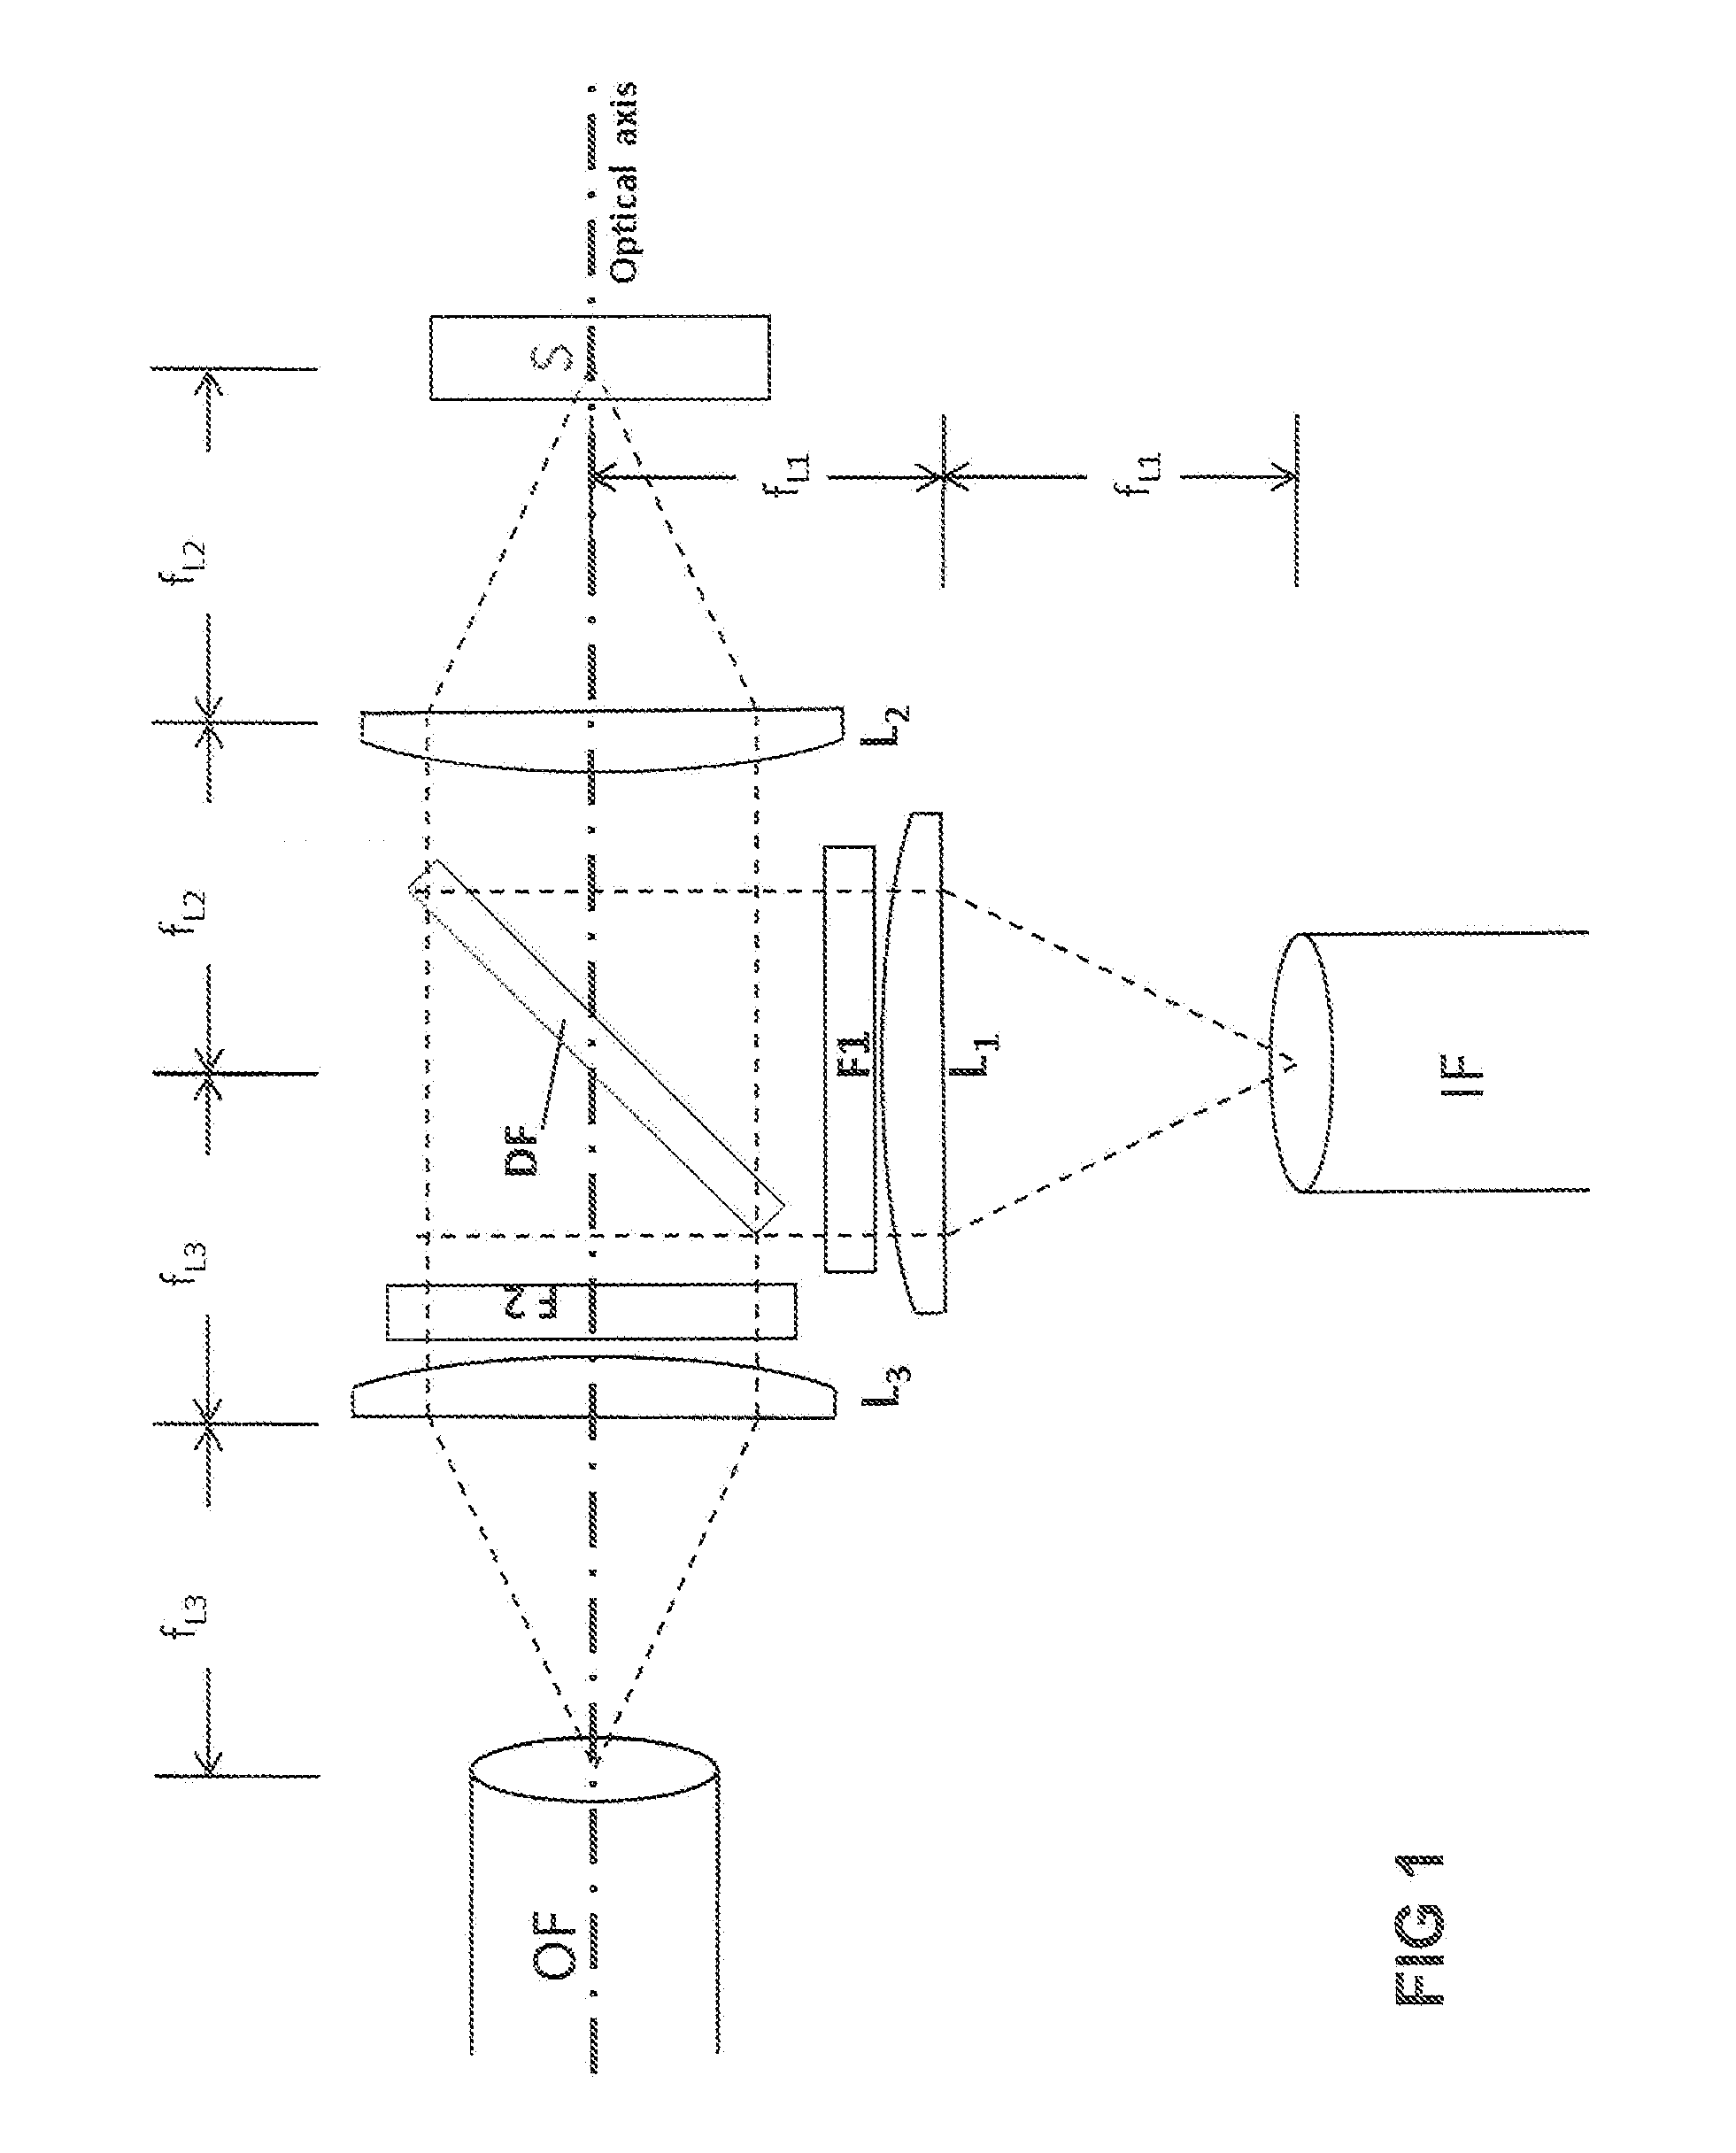 Optical system enabling low power excitation and high sensitivity detection of near infrared to visible upconversion phoshors